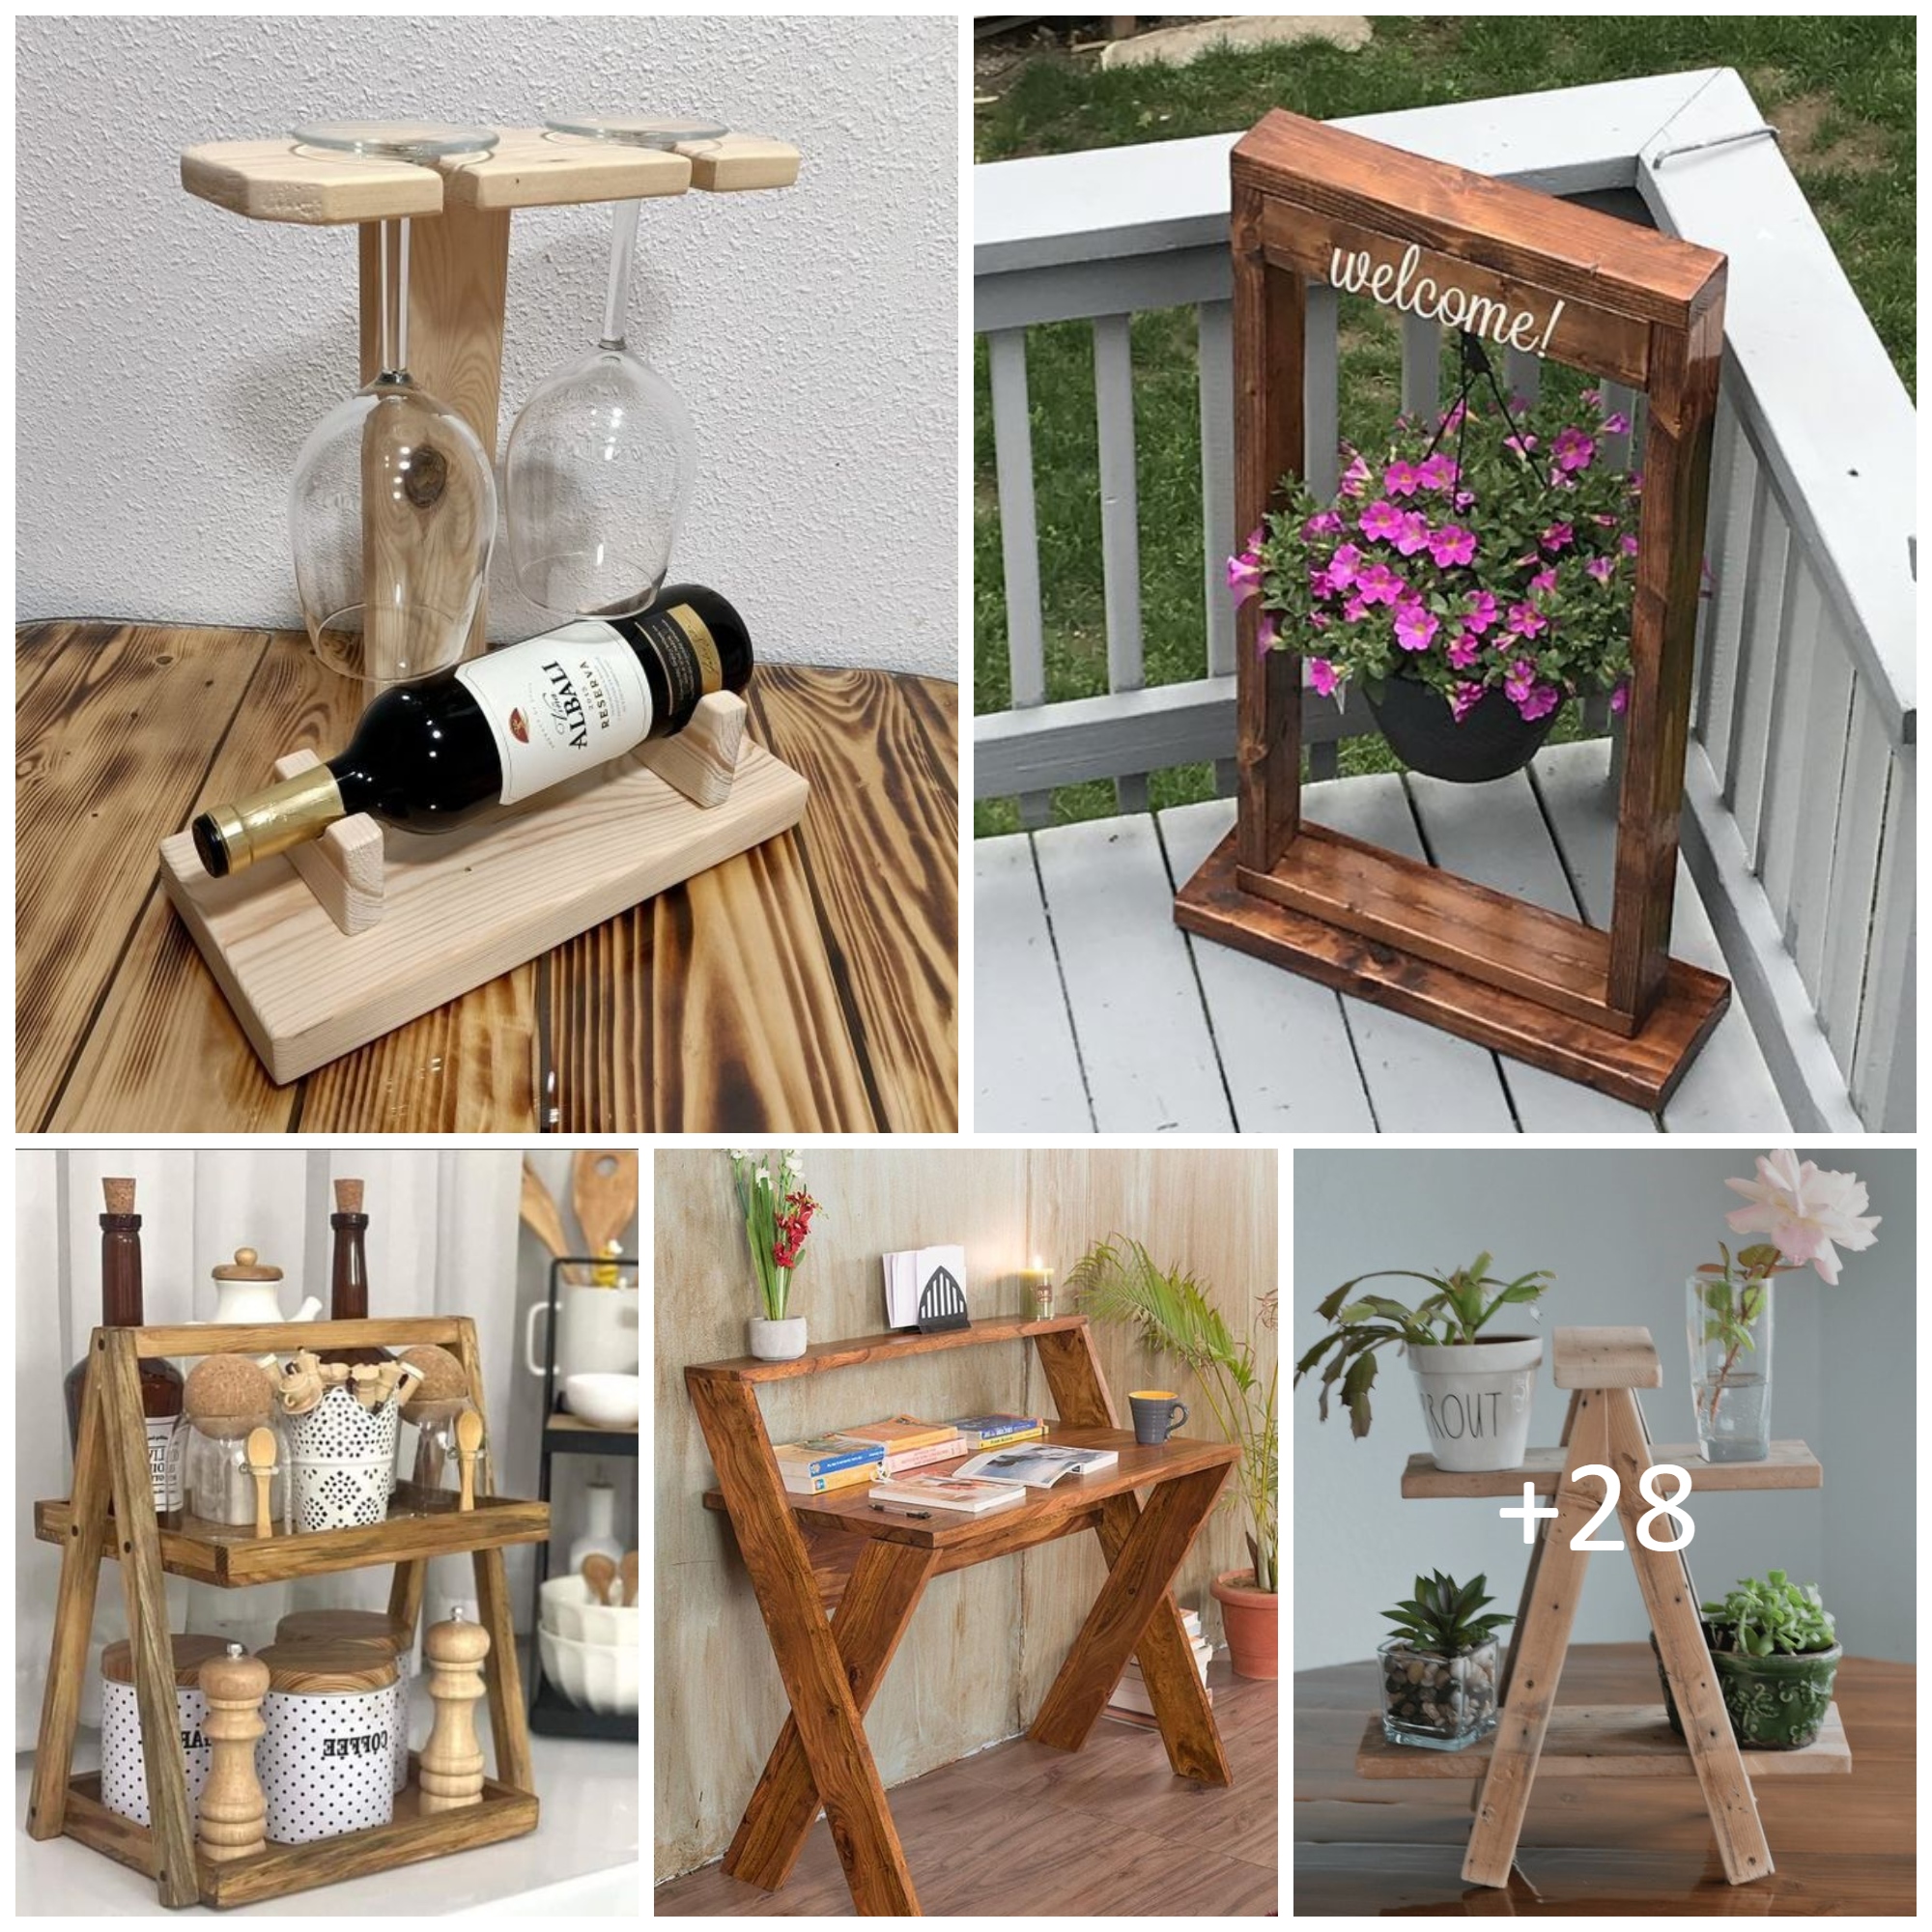 Awesome woodworking ideas and inspirations